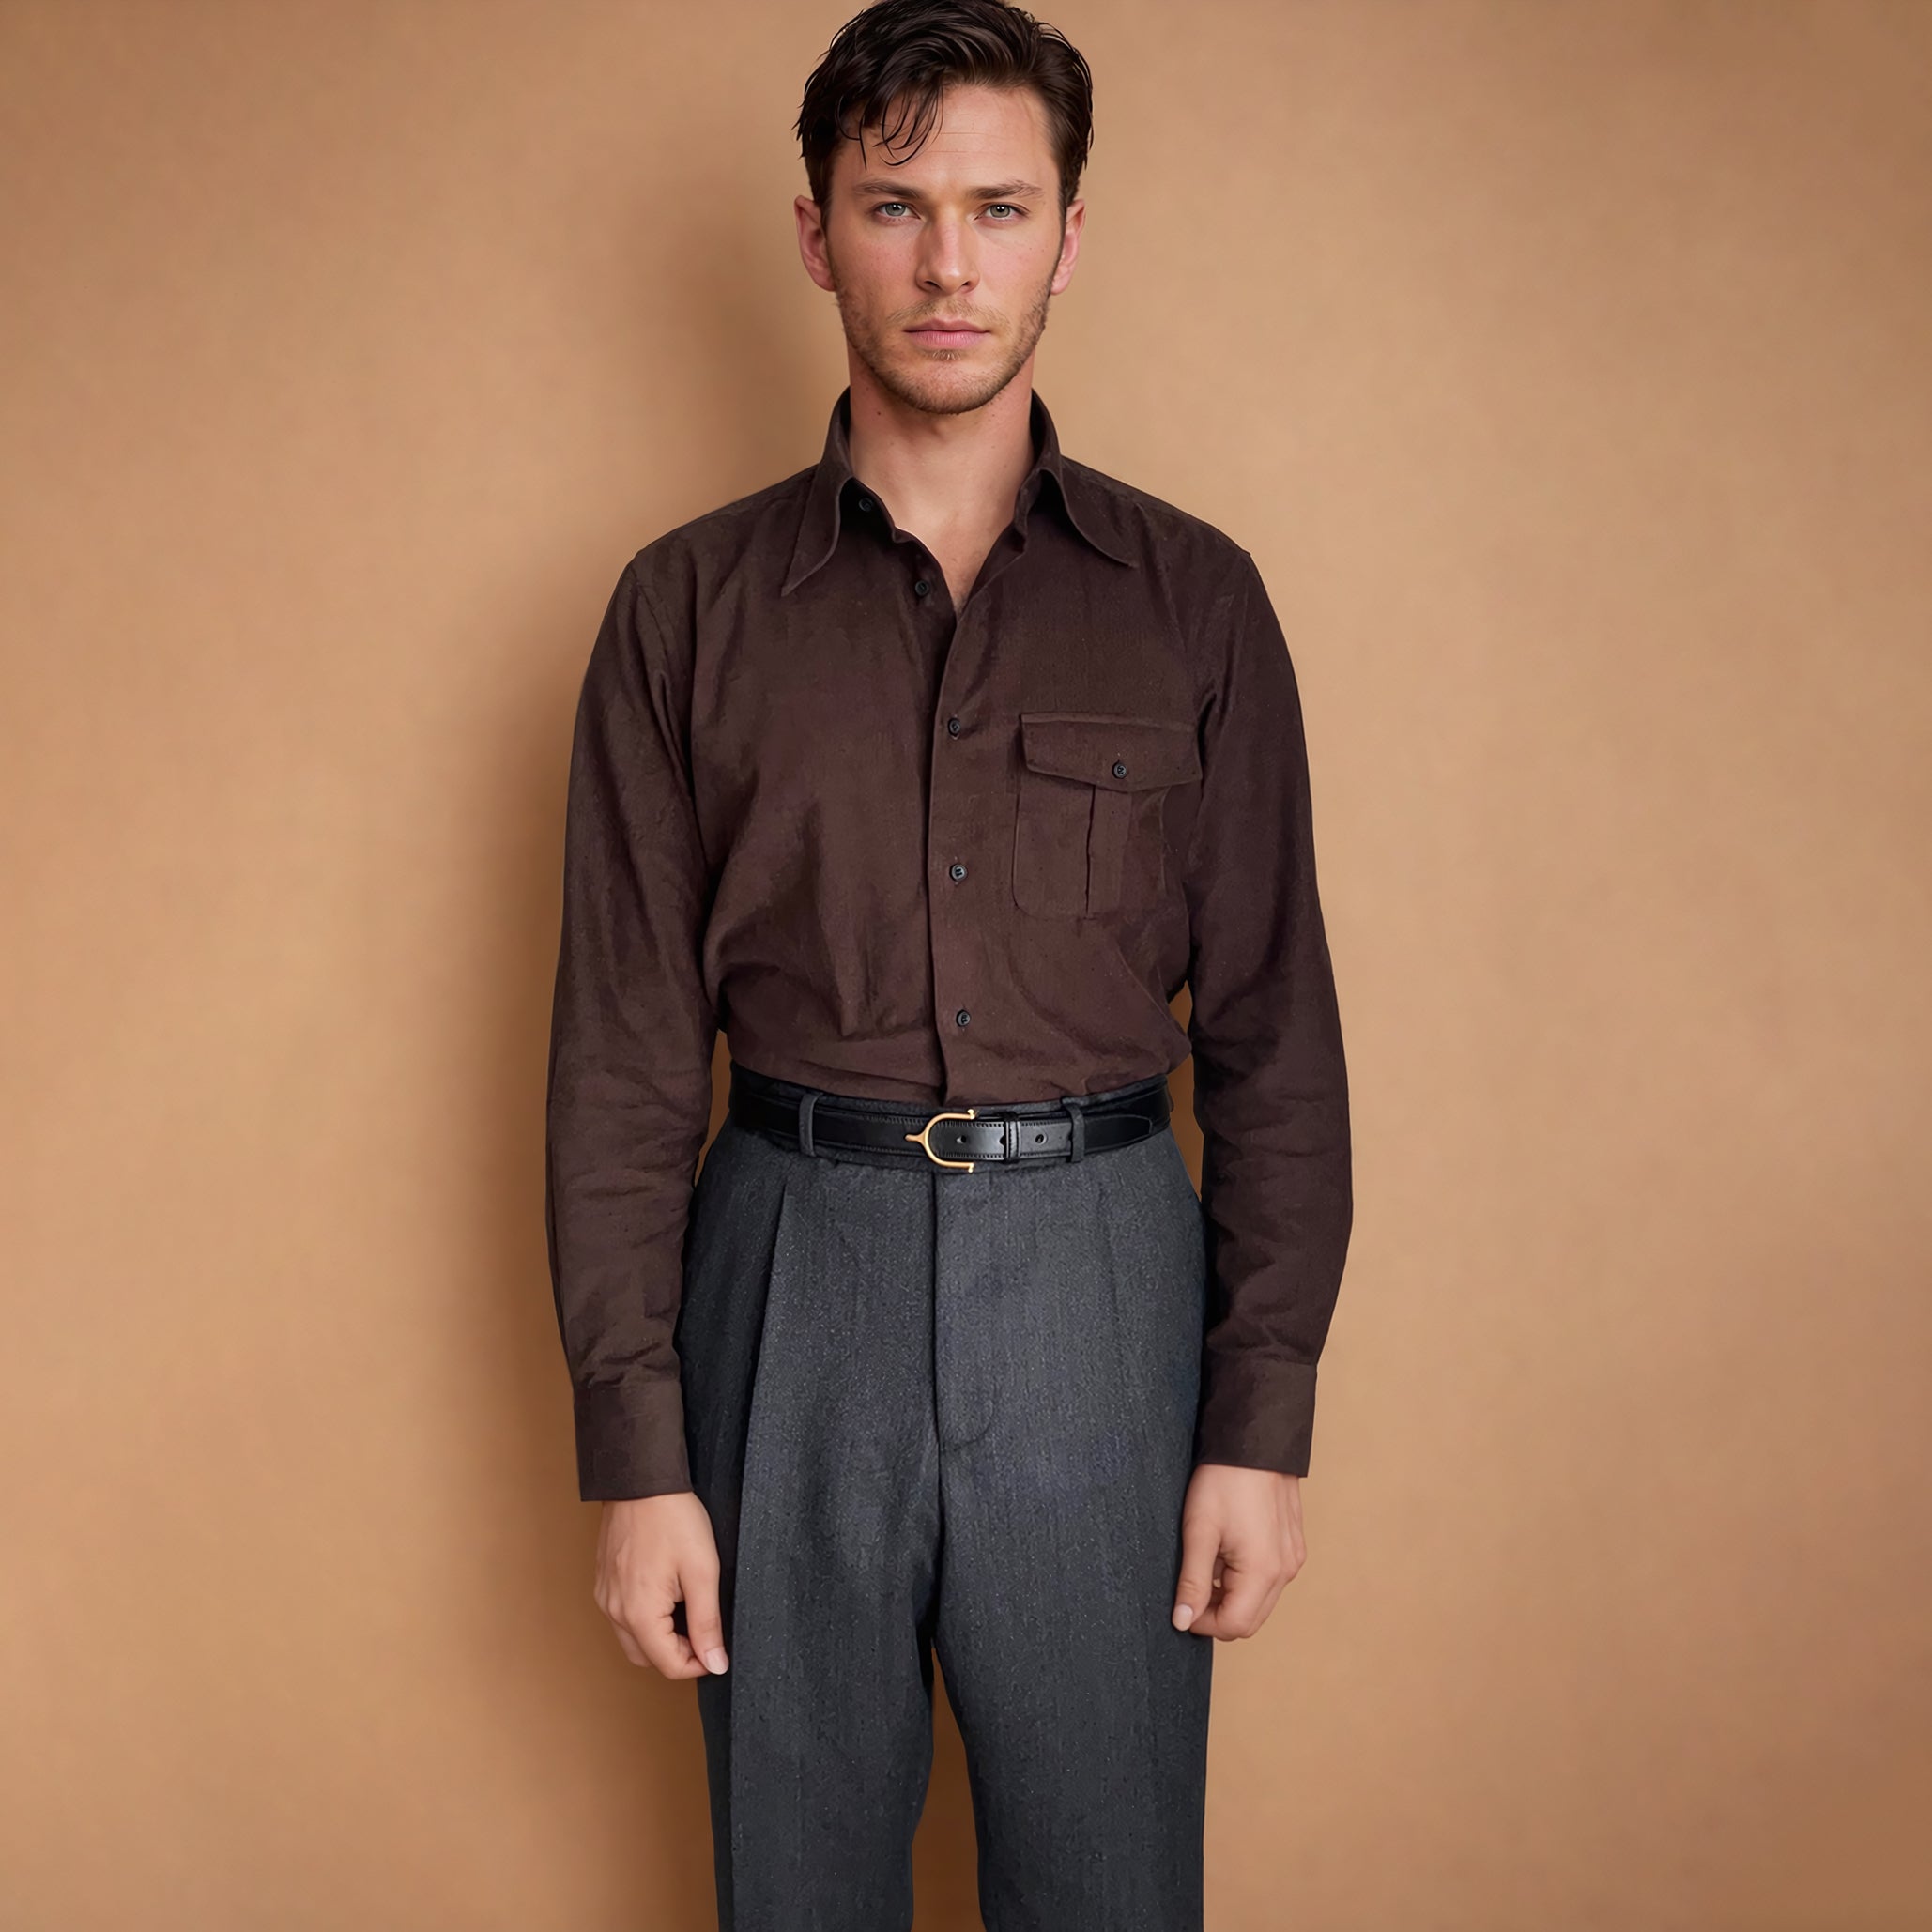 Lightweight Corduroy Shirts: Elevate Your Style with Comfort and Versatility